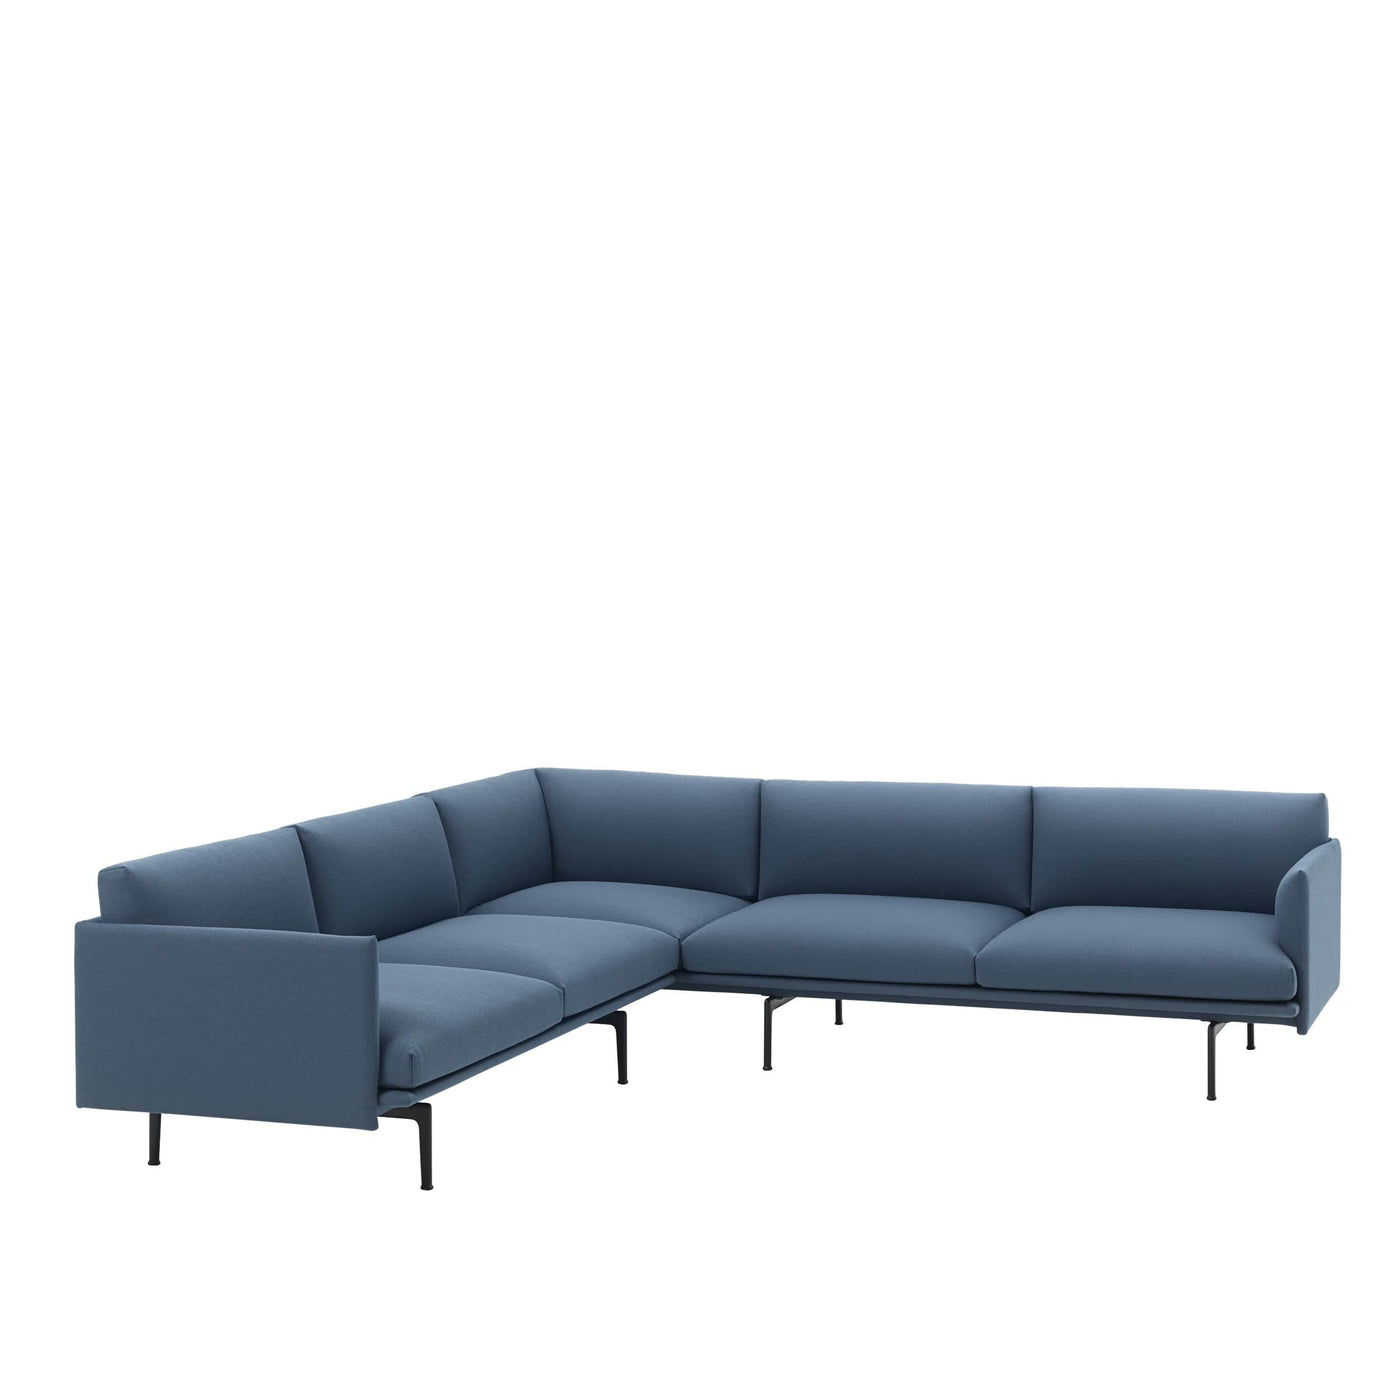 Vidar 733 by Kvadrat/Raf Simons. Blue upholstery wool fabric made to order for Muuto Outline & In Situ sofas. Order free fabric swatches at someday designs. 